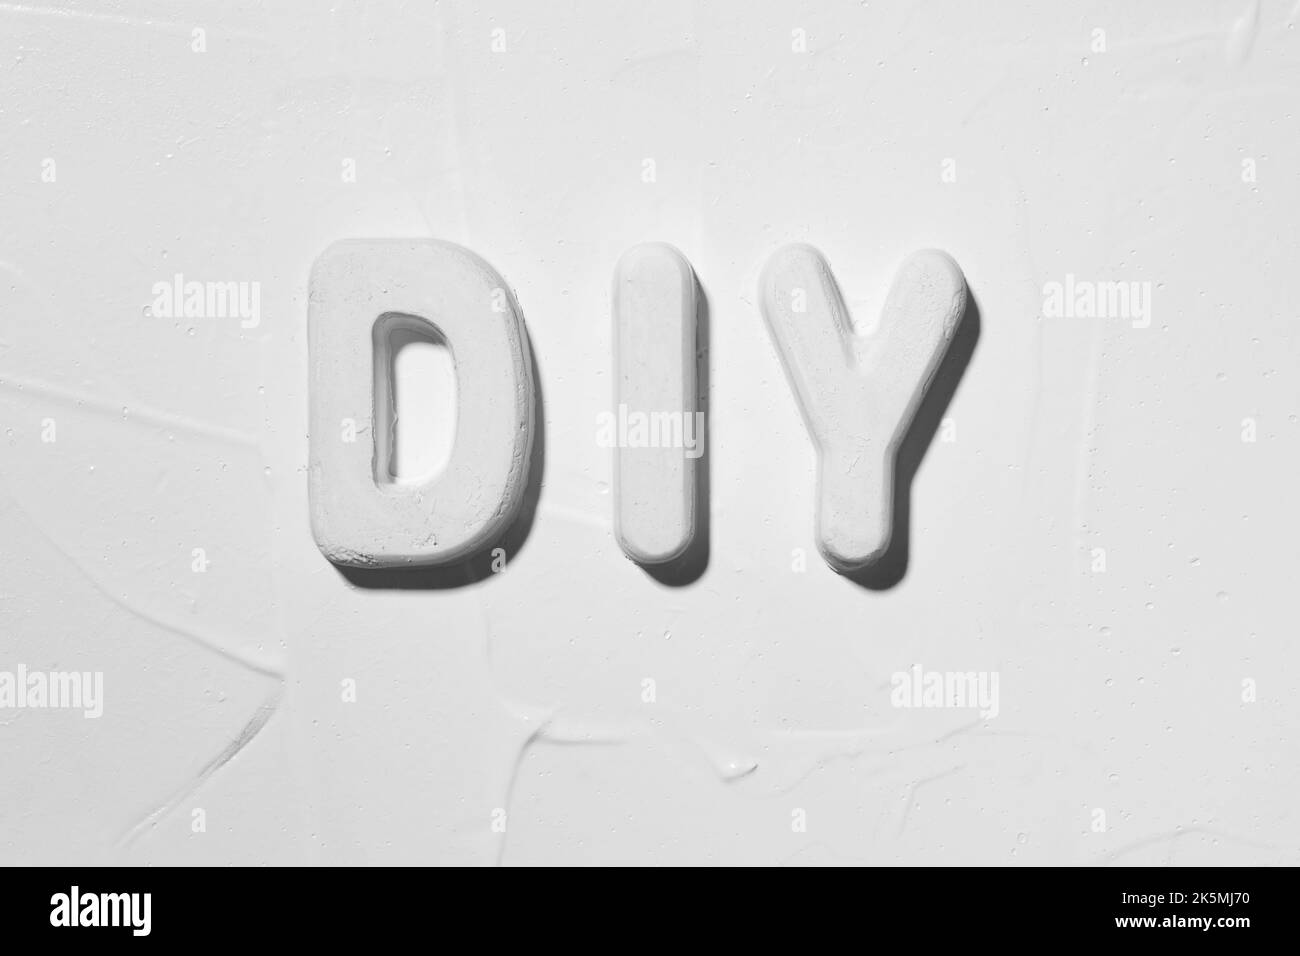 DIY (Do It Yourself). Plaster moulded letters on white stucco Stock Photo